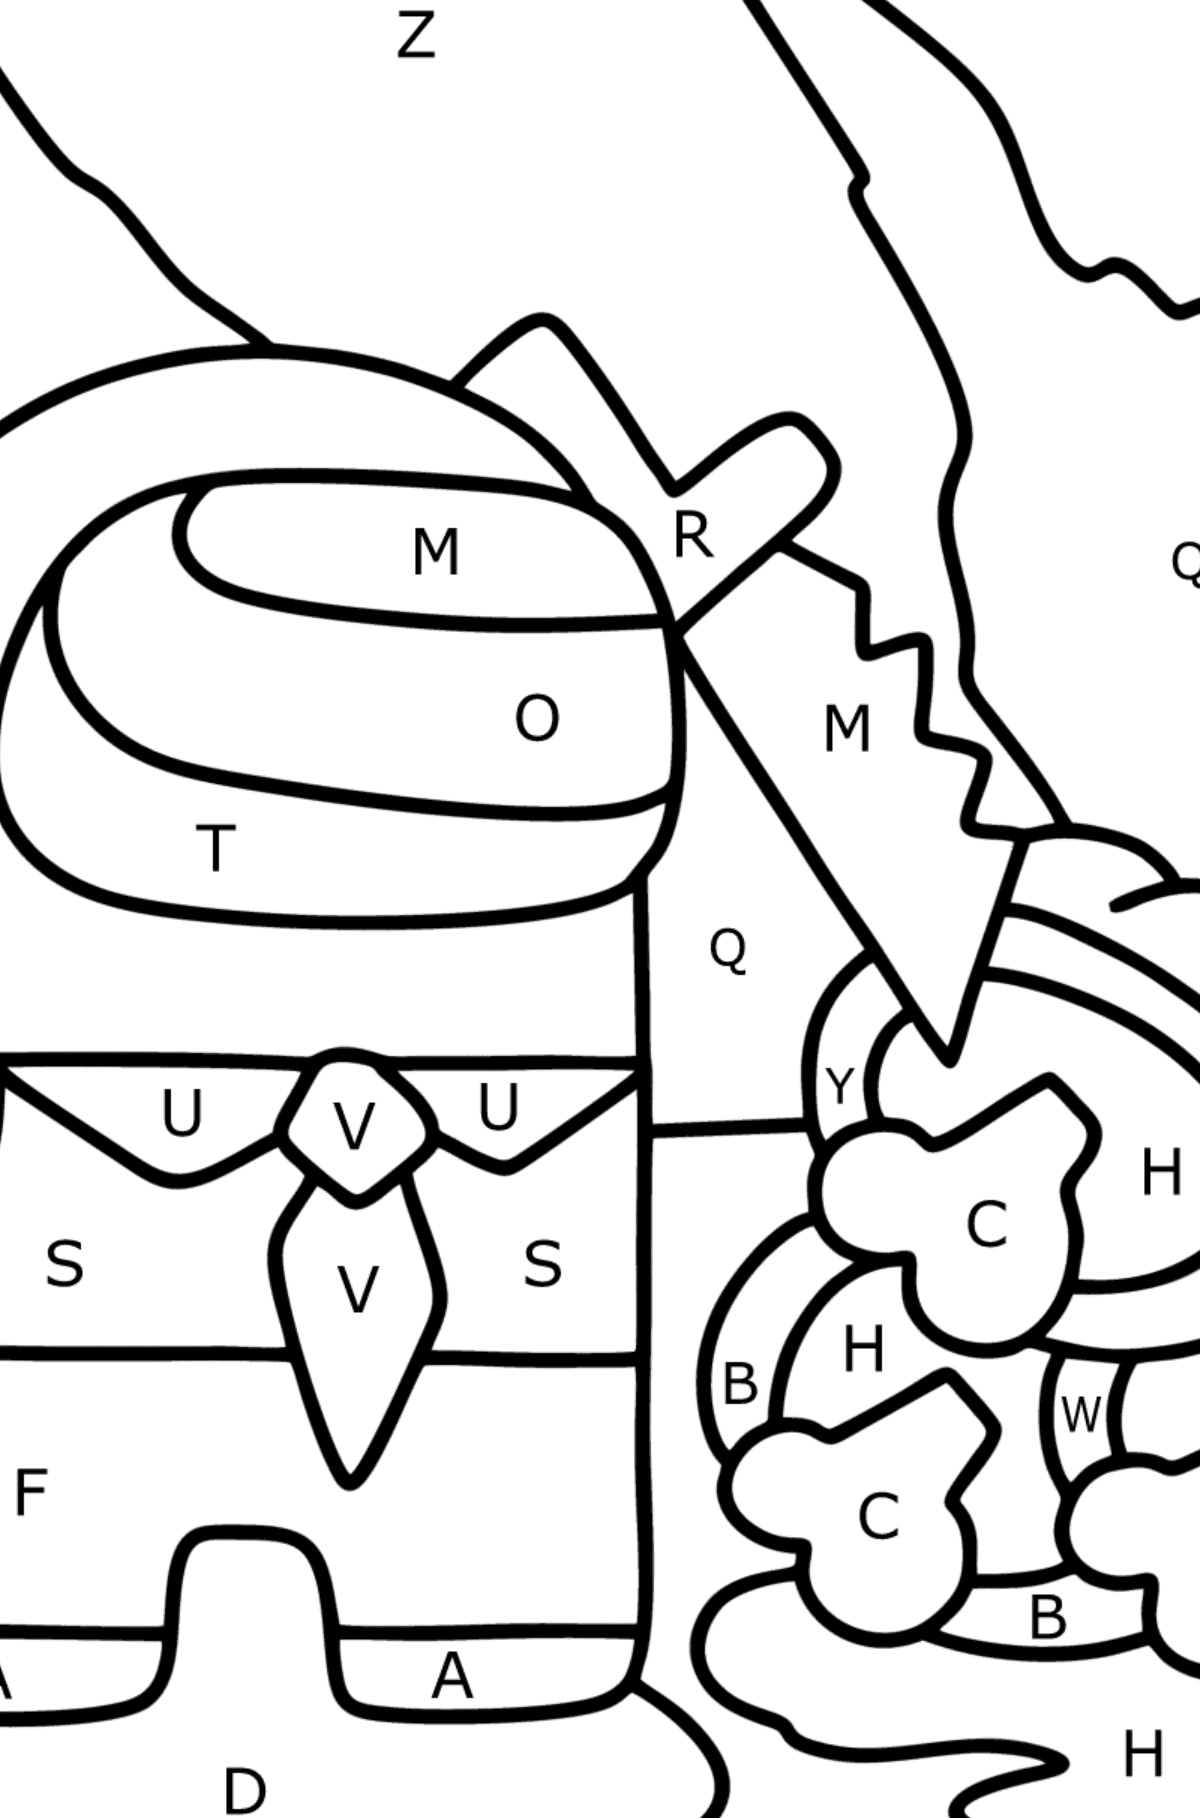 Coloring page Among As Victory - Coloring by Letters for Kids